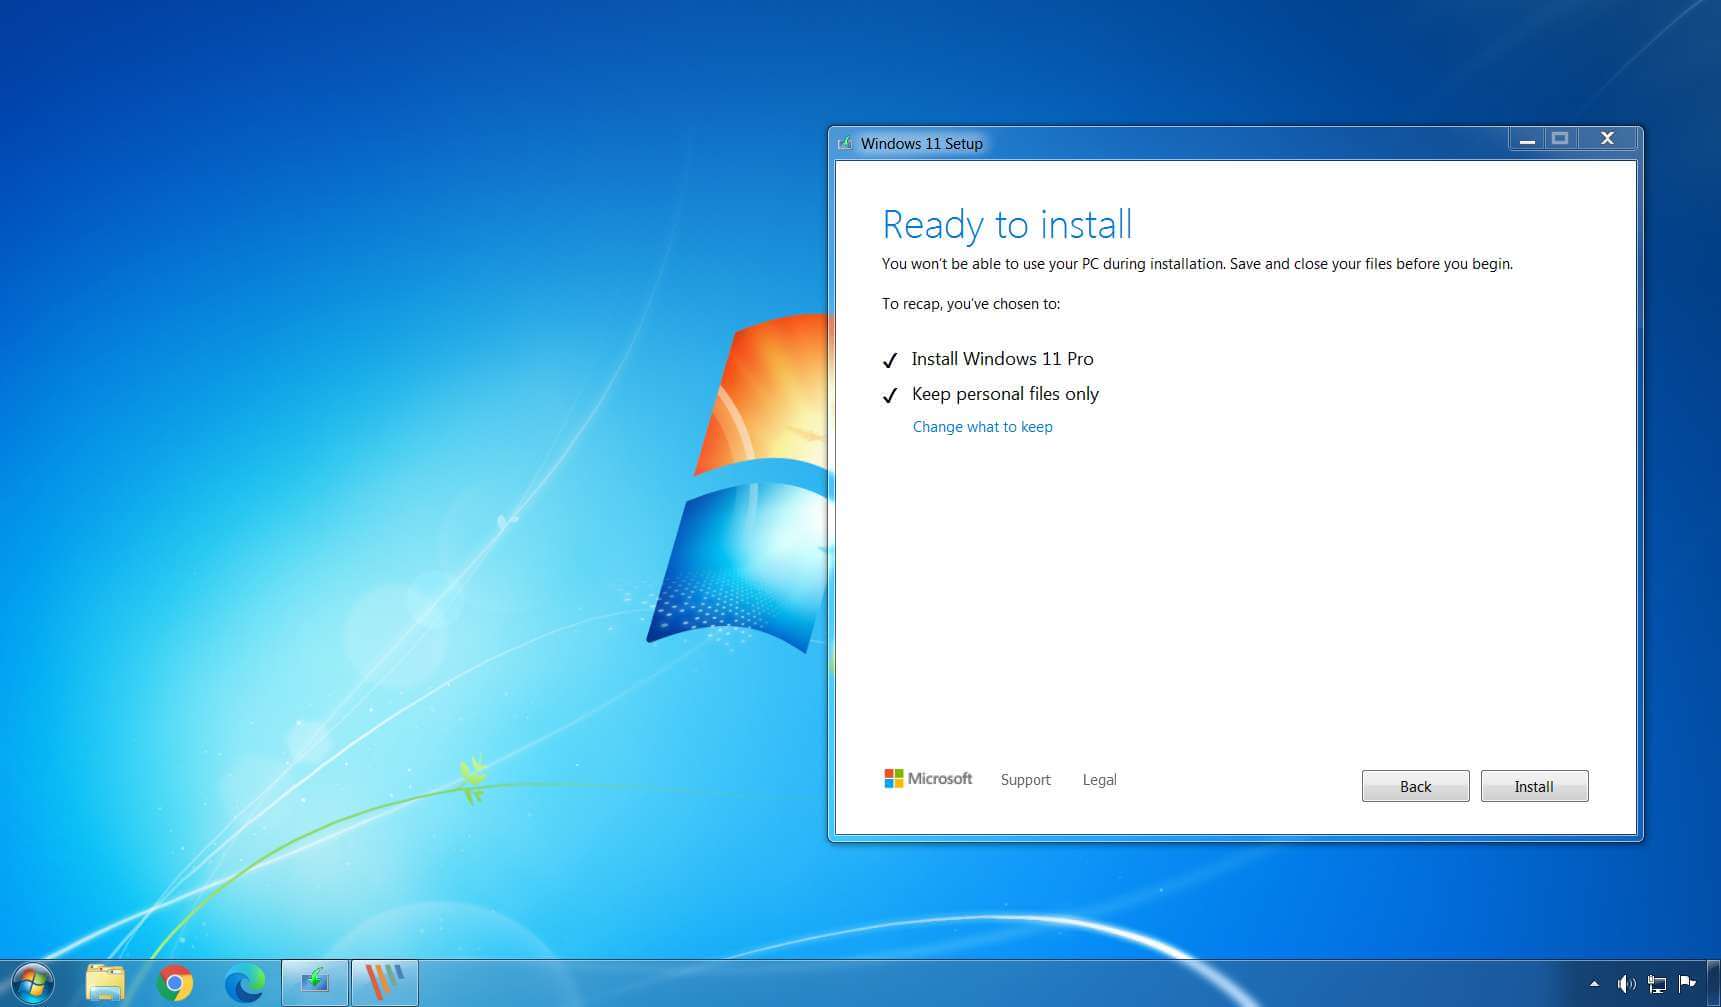 Can I directly install Windows 11 on Windows 7?